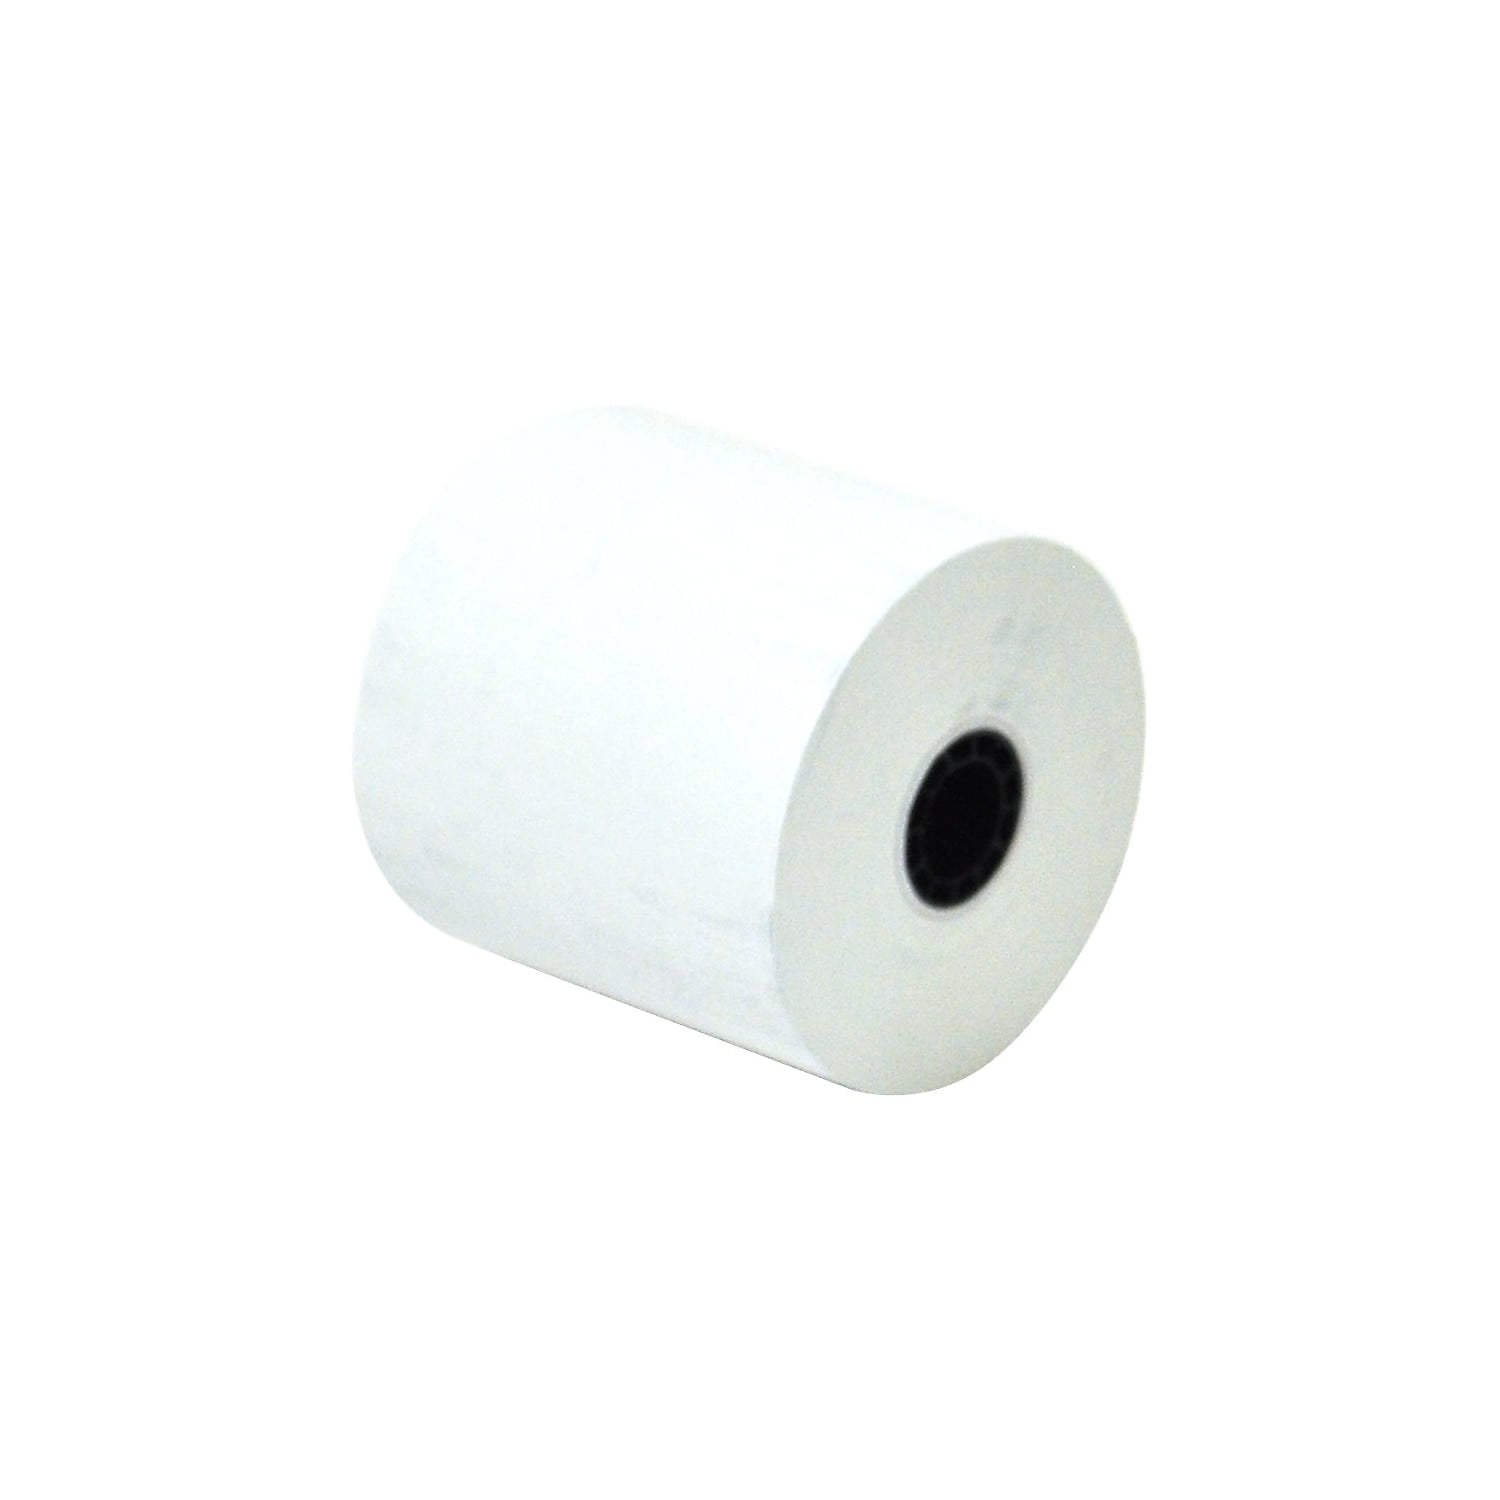 Details about   Iconex Direct Thermal Printing Thermal Paper Rolls 2.25" x 55 ft White 